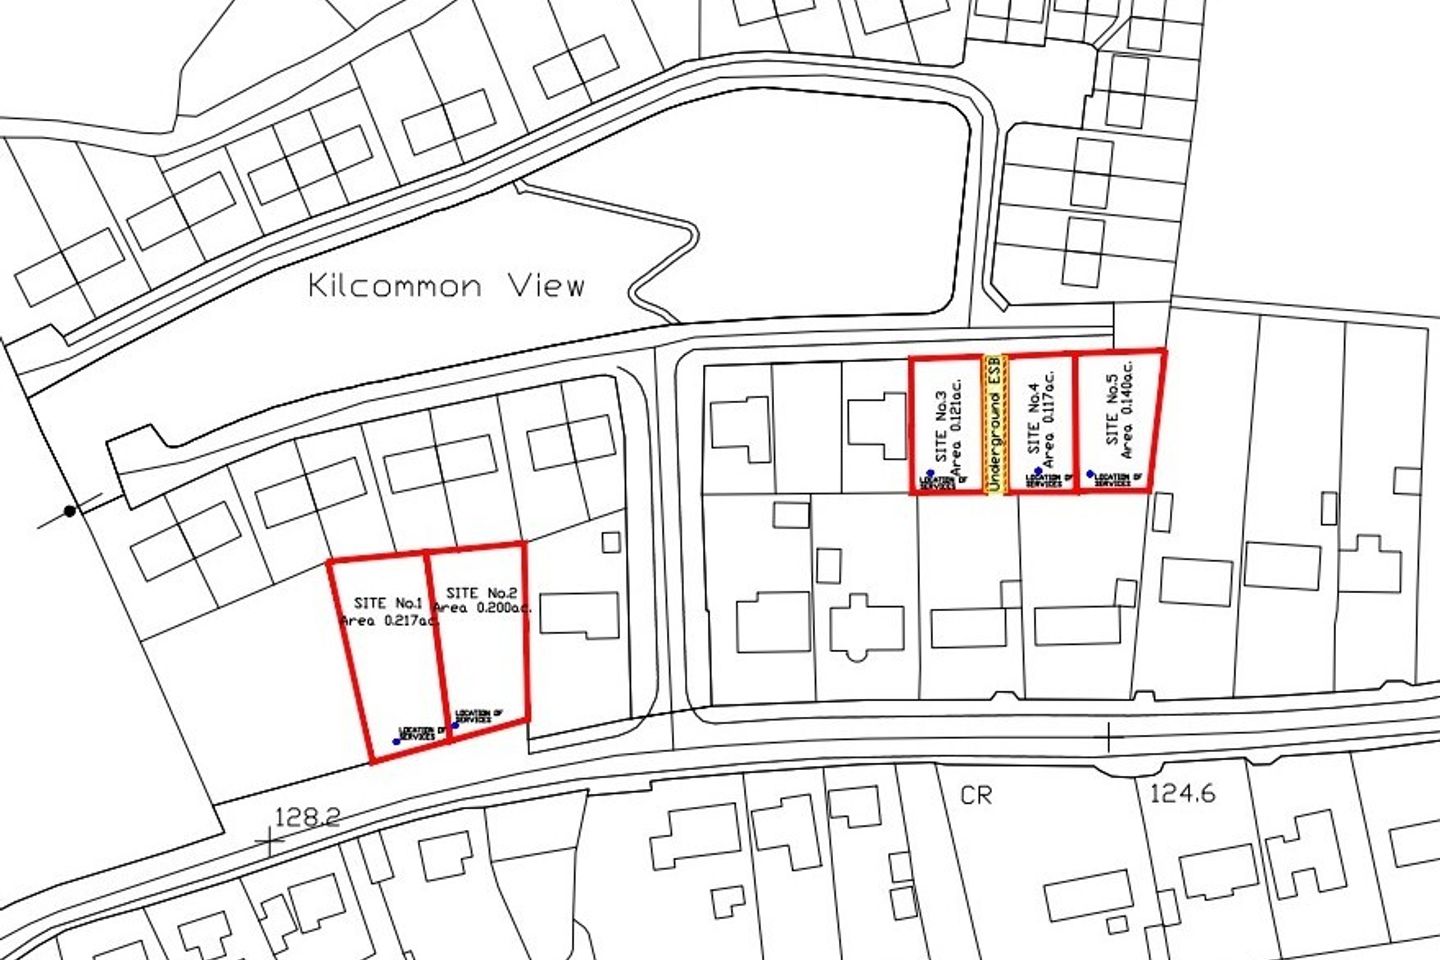 3 Serviced Sites for New Homes (Ready to Build Scheme), Kilcommon, Tinahely, Co. Wicklow